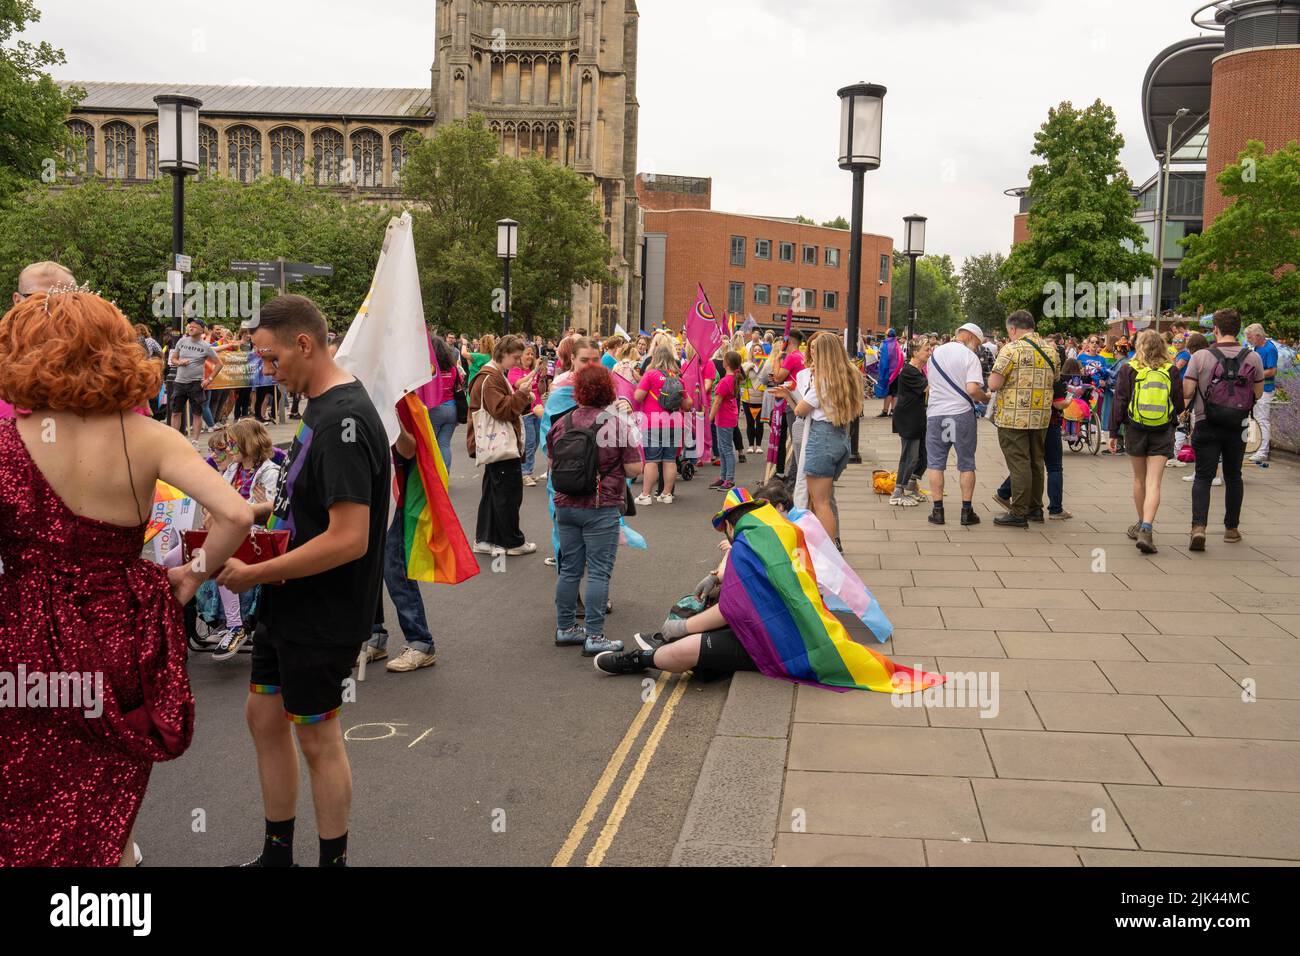 people waiting on kerbside waiting for LGBT Pride march to go ahead Stock Photo